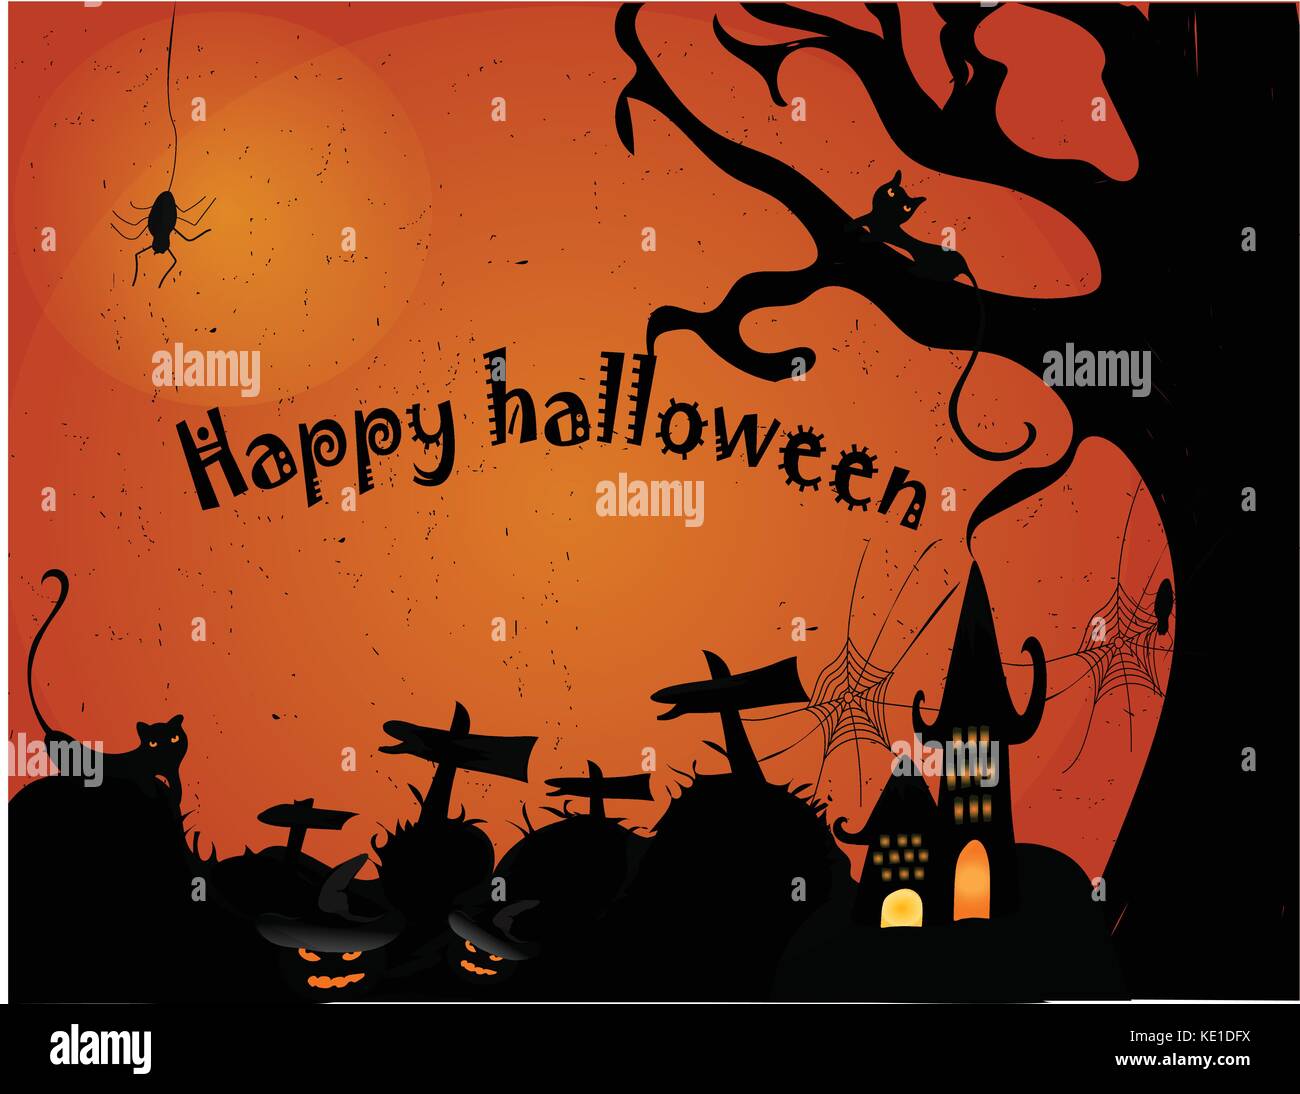 Halloween wallpapers red brick wall pumpkin trees and awesome